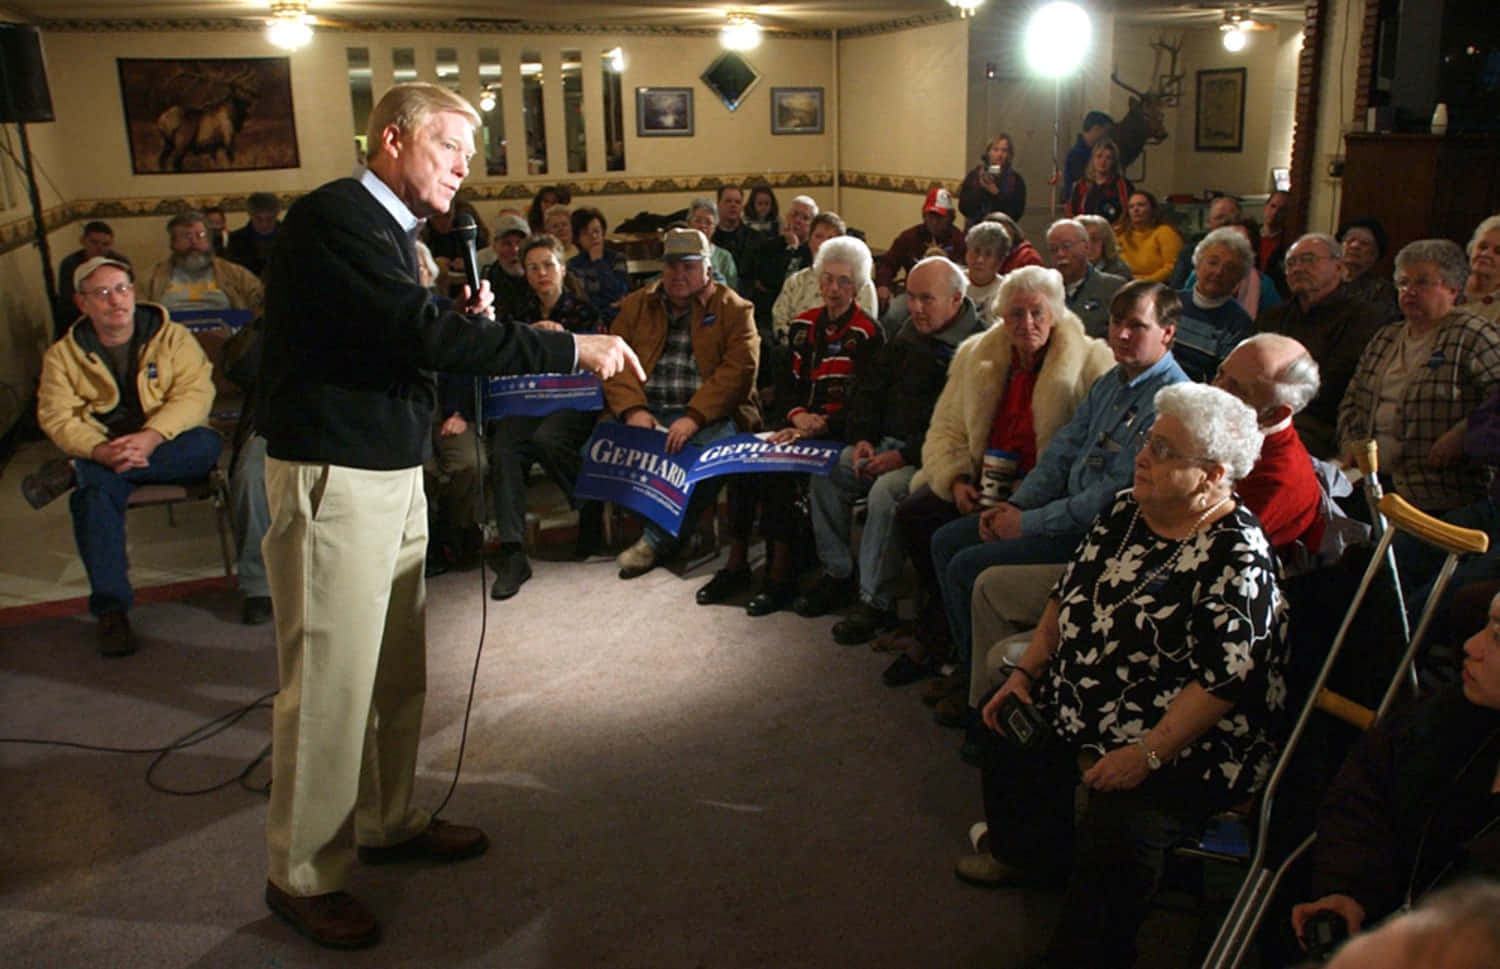 Dick Gephardt Campaigning Wallpaper